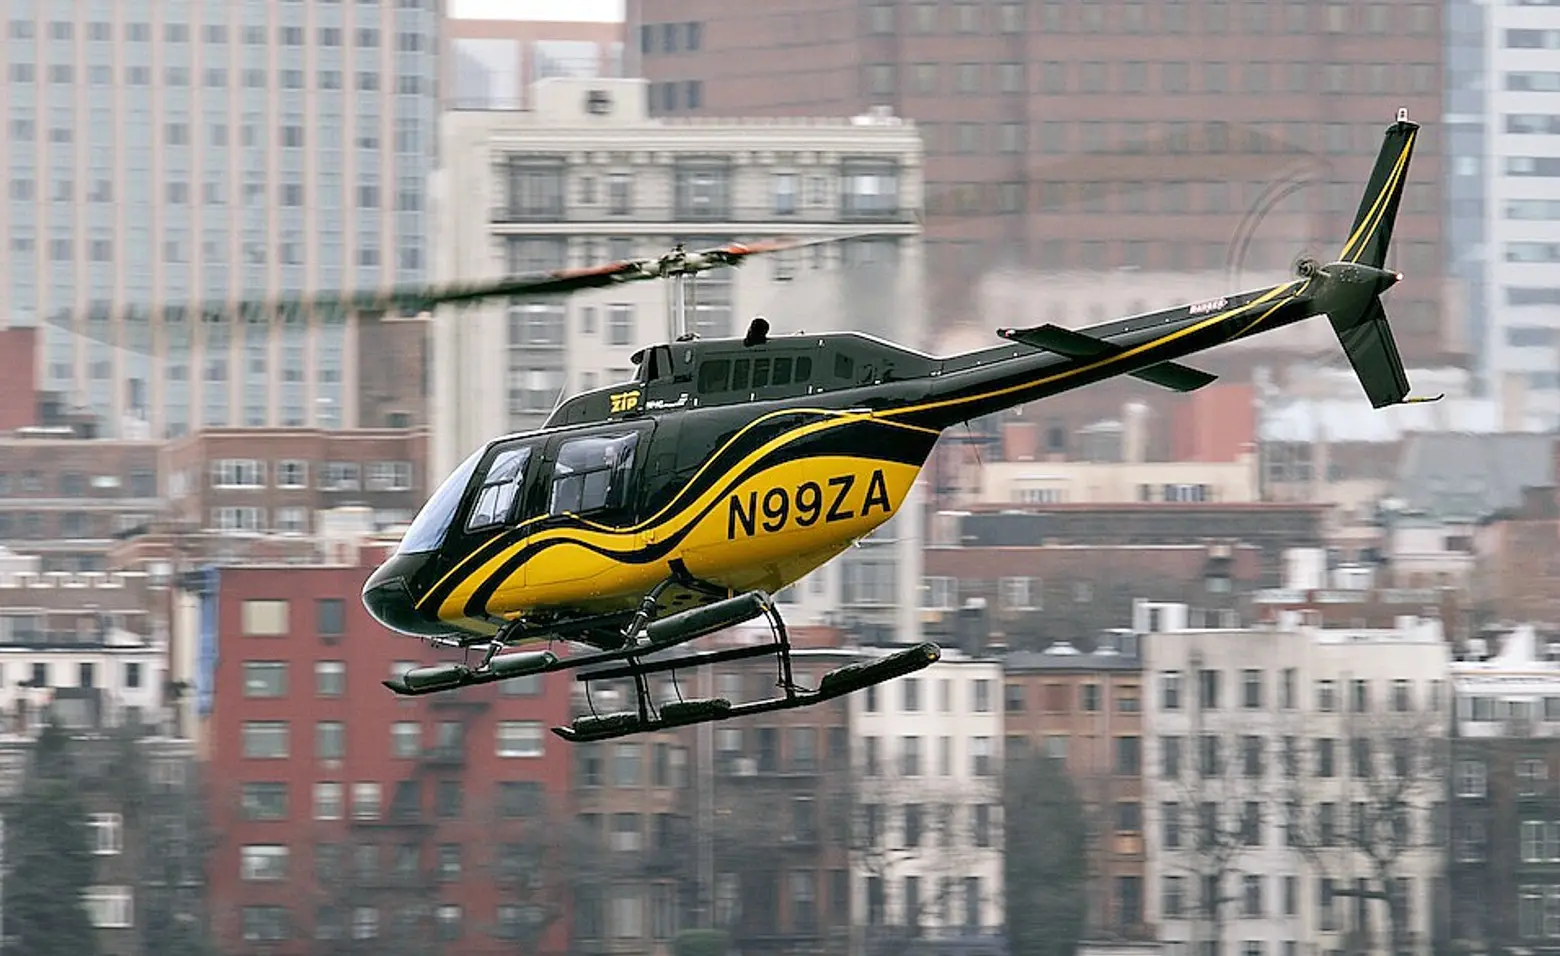 Why Not Take a Helicopter to the Airport? An Ode to the Smells of NYC